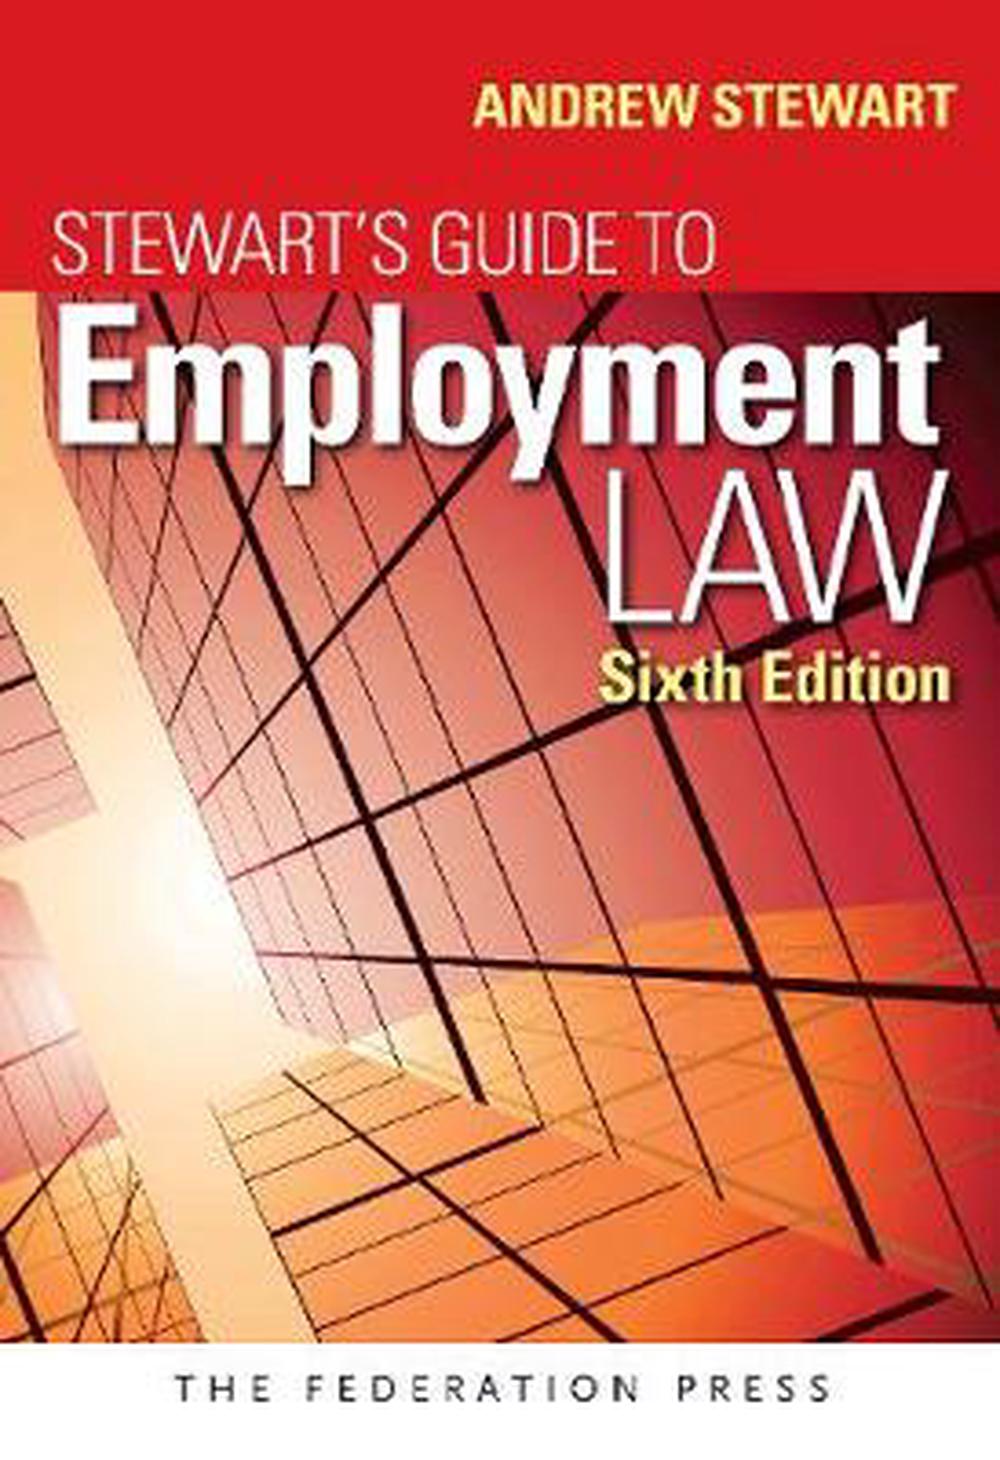 Stewart's Guide to Employment Law, 6th Edition